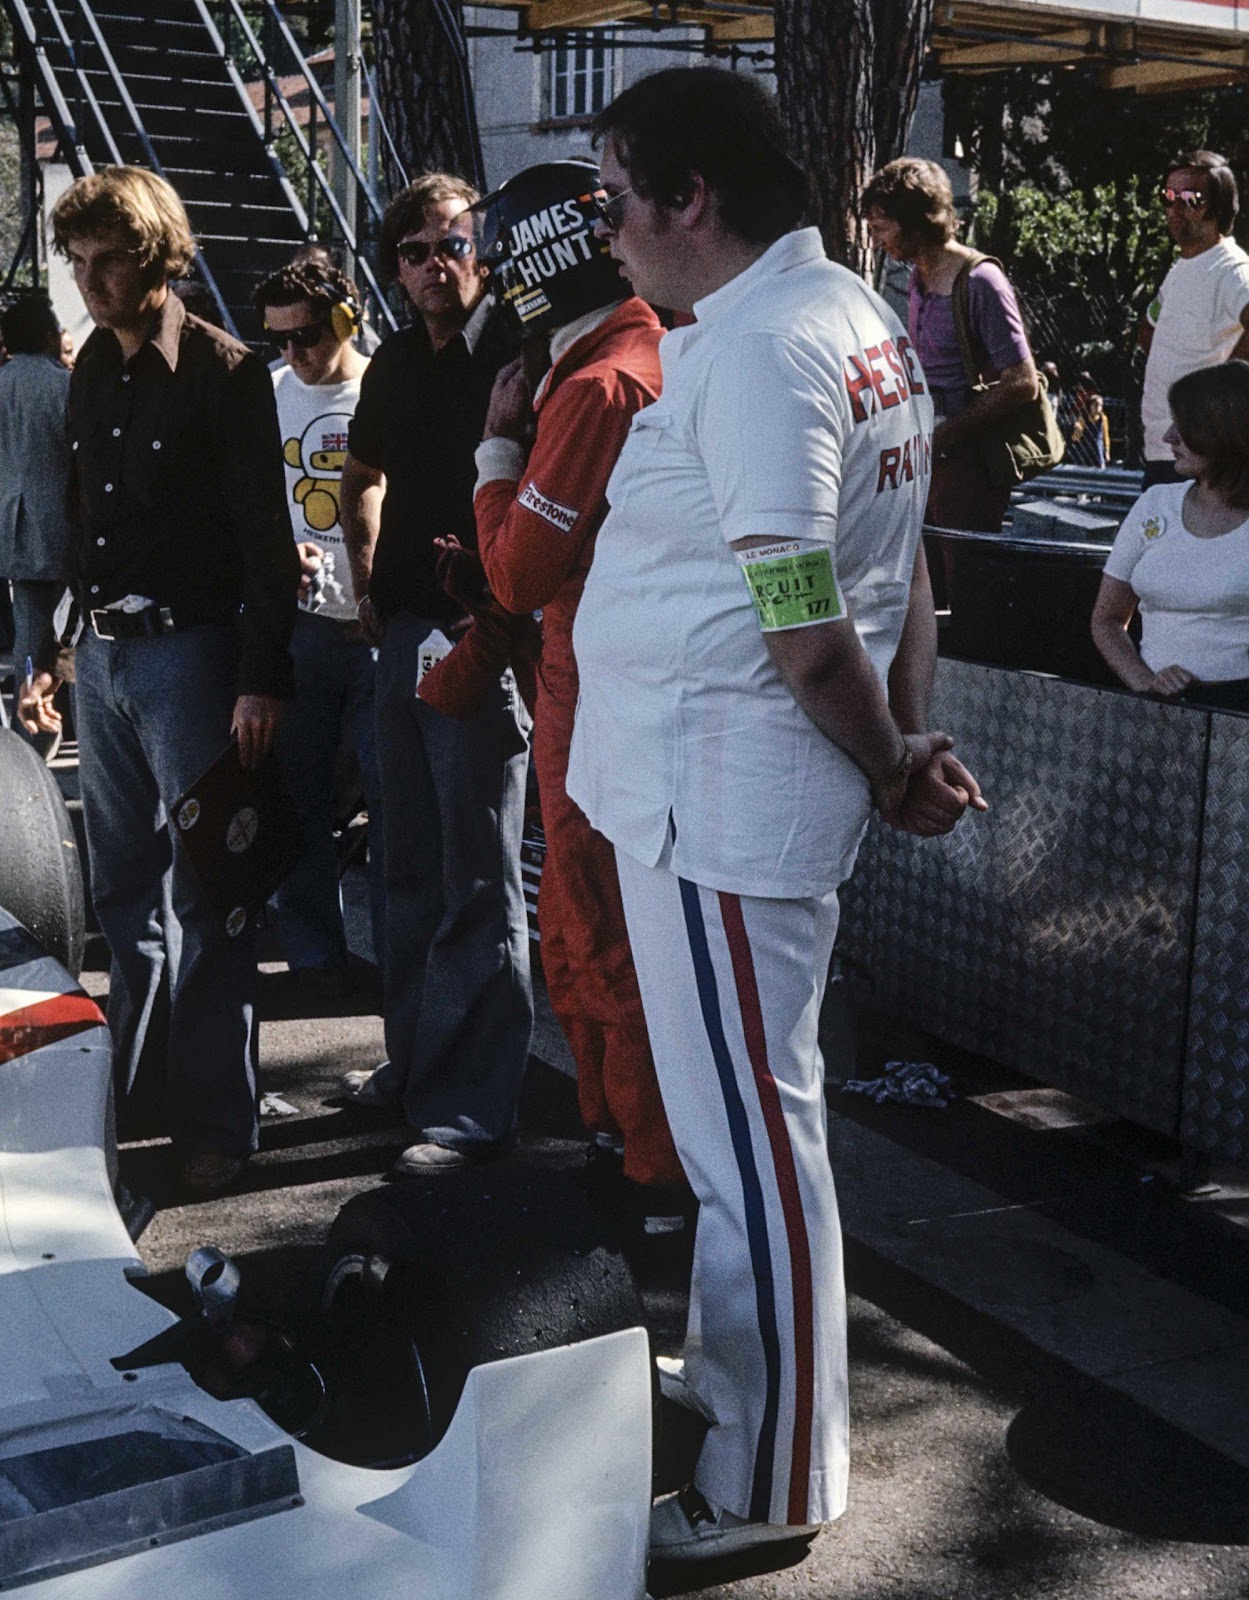 Lord Hesketh with Hunt, team manager Bubbles Horsley and Postlethwaite at Monaco in 1974.